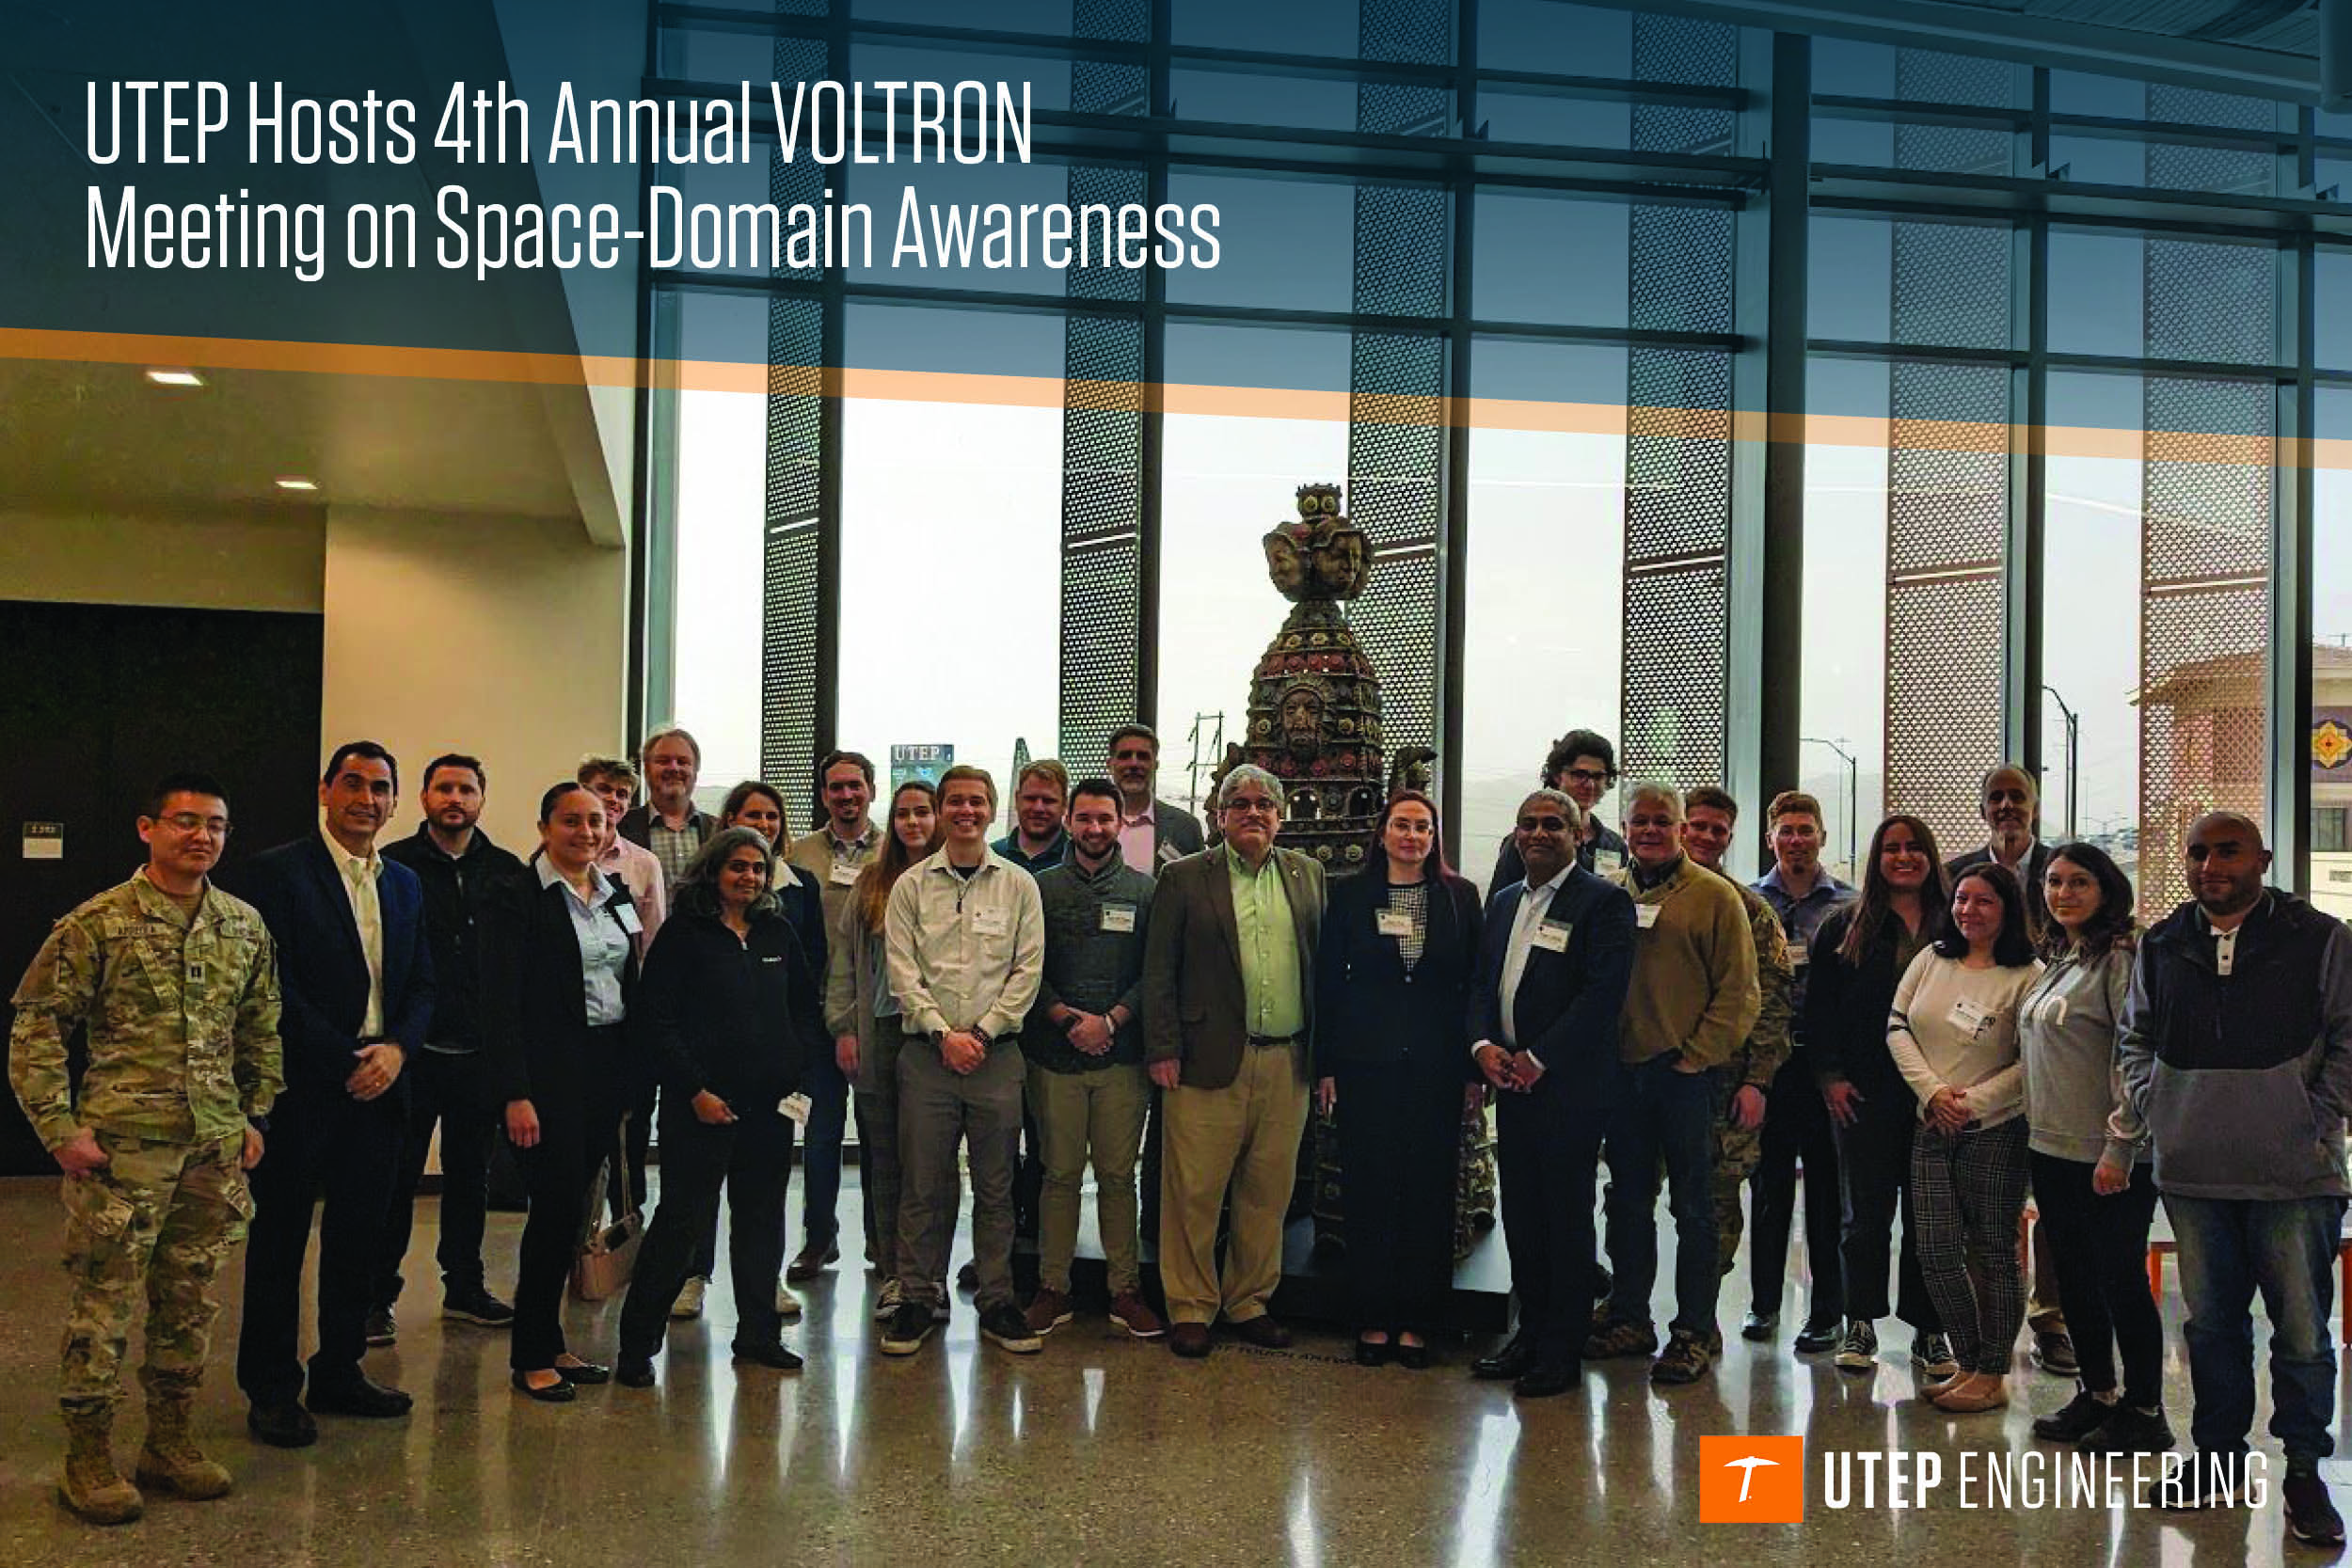 UTEP Hosts 4th Annual VOLTRON Meeting on Space-Domain Awareness